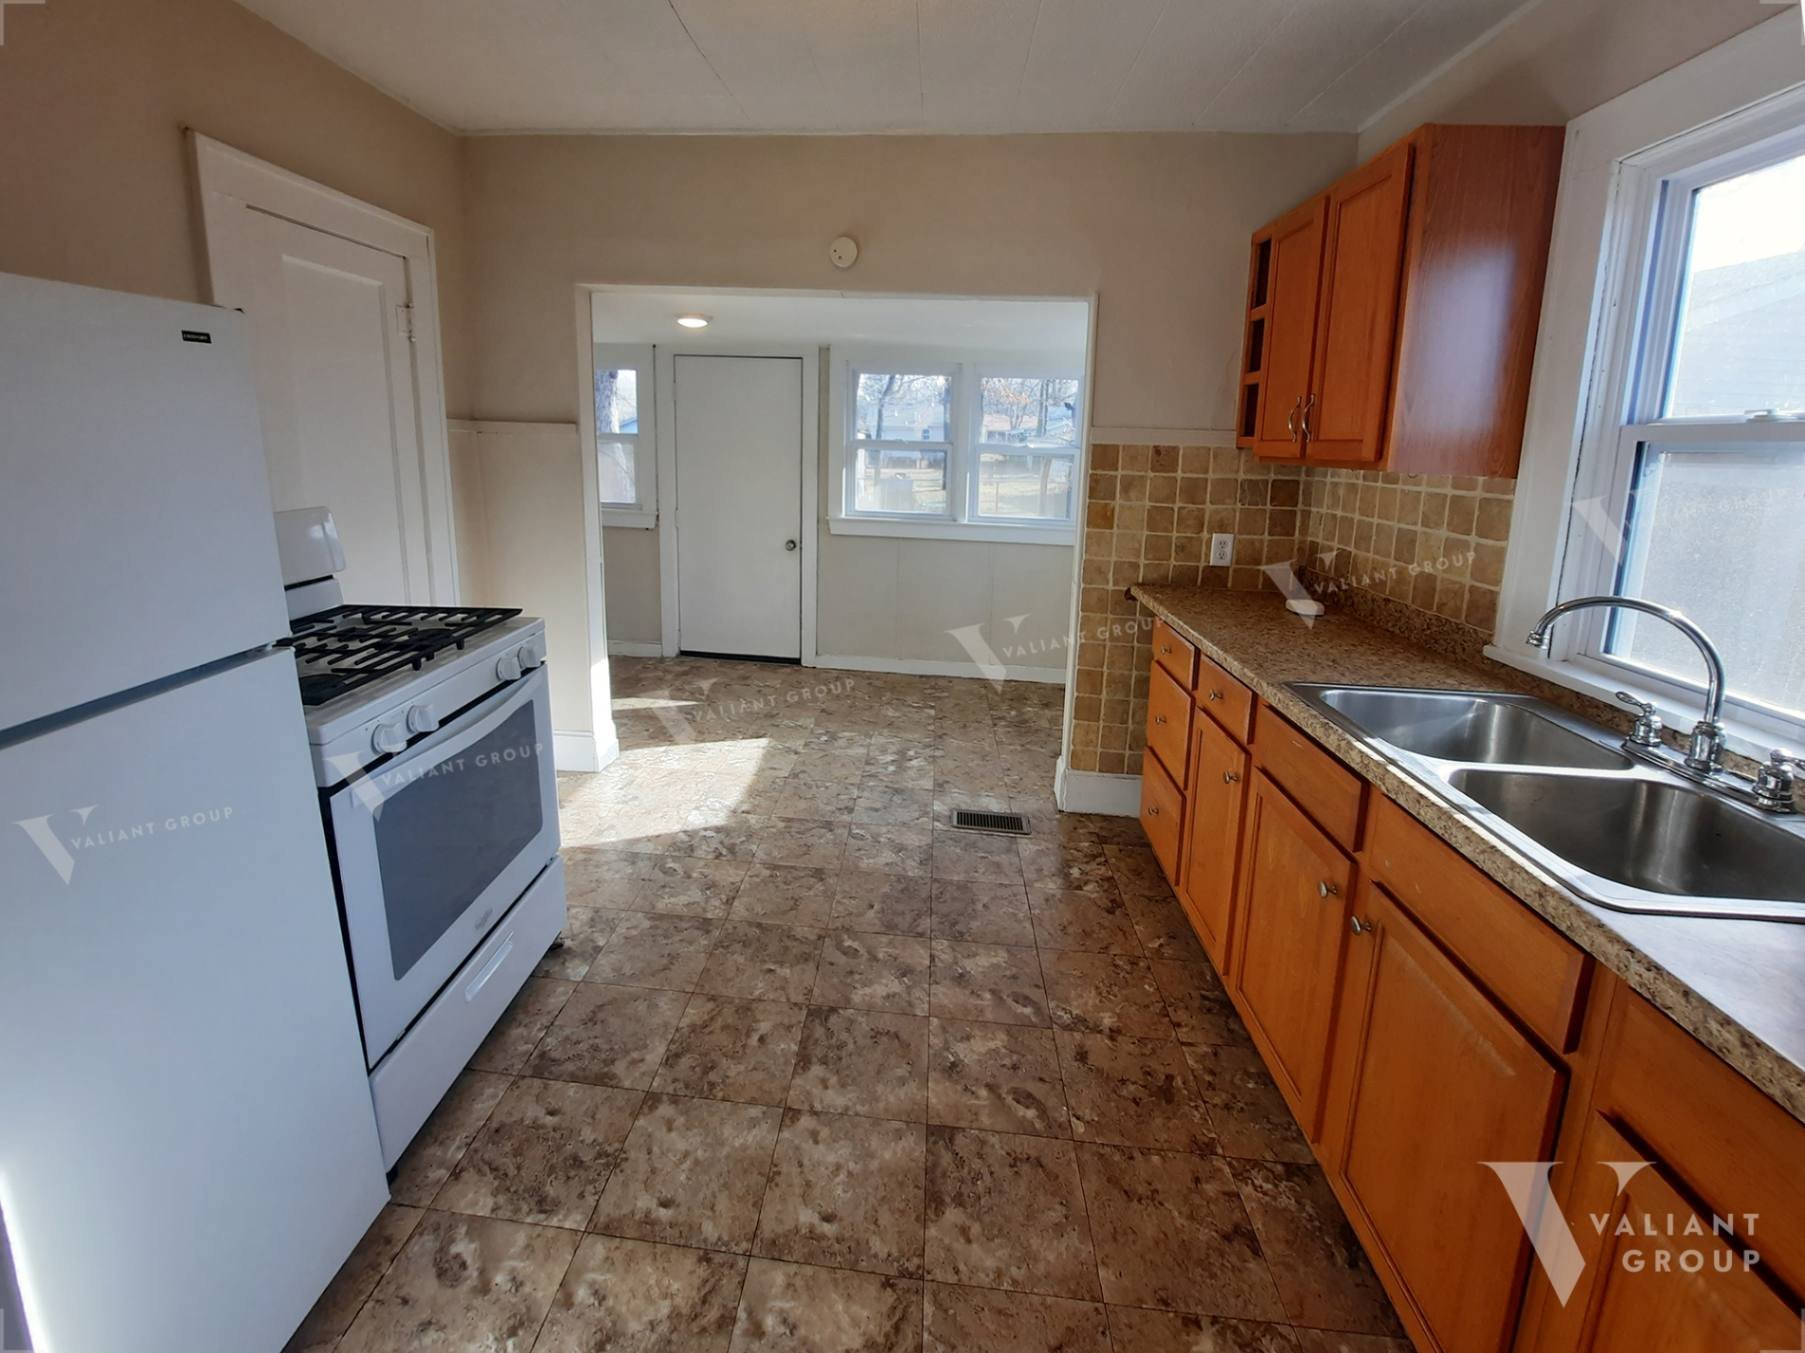 House-For-Rent-1012-S-Fort-Ave-Springfield-MO-04-Kitchen.jpg